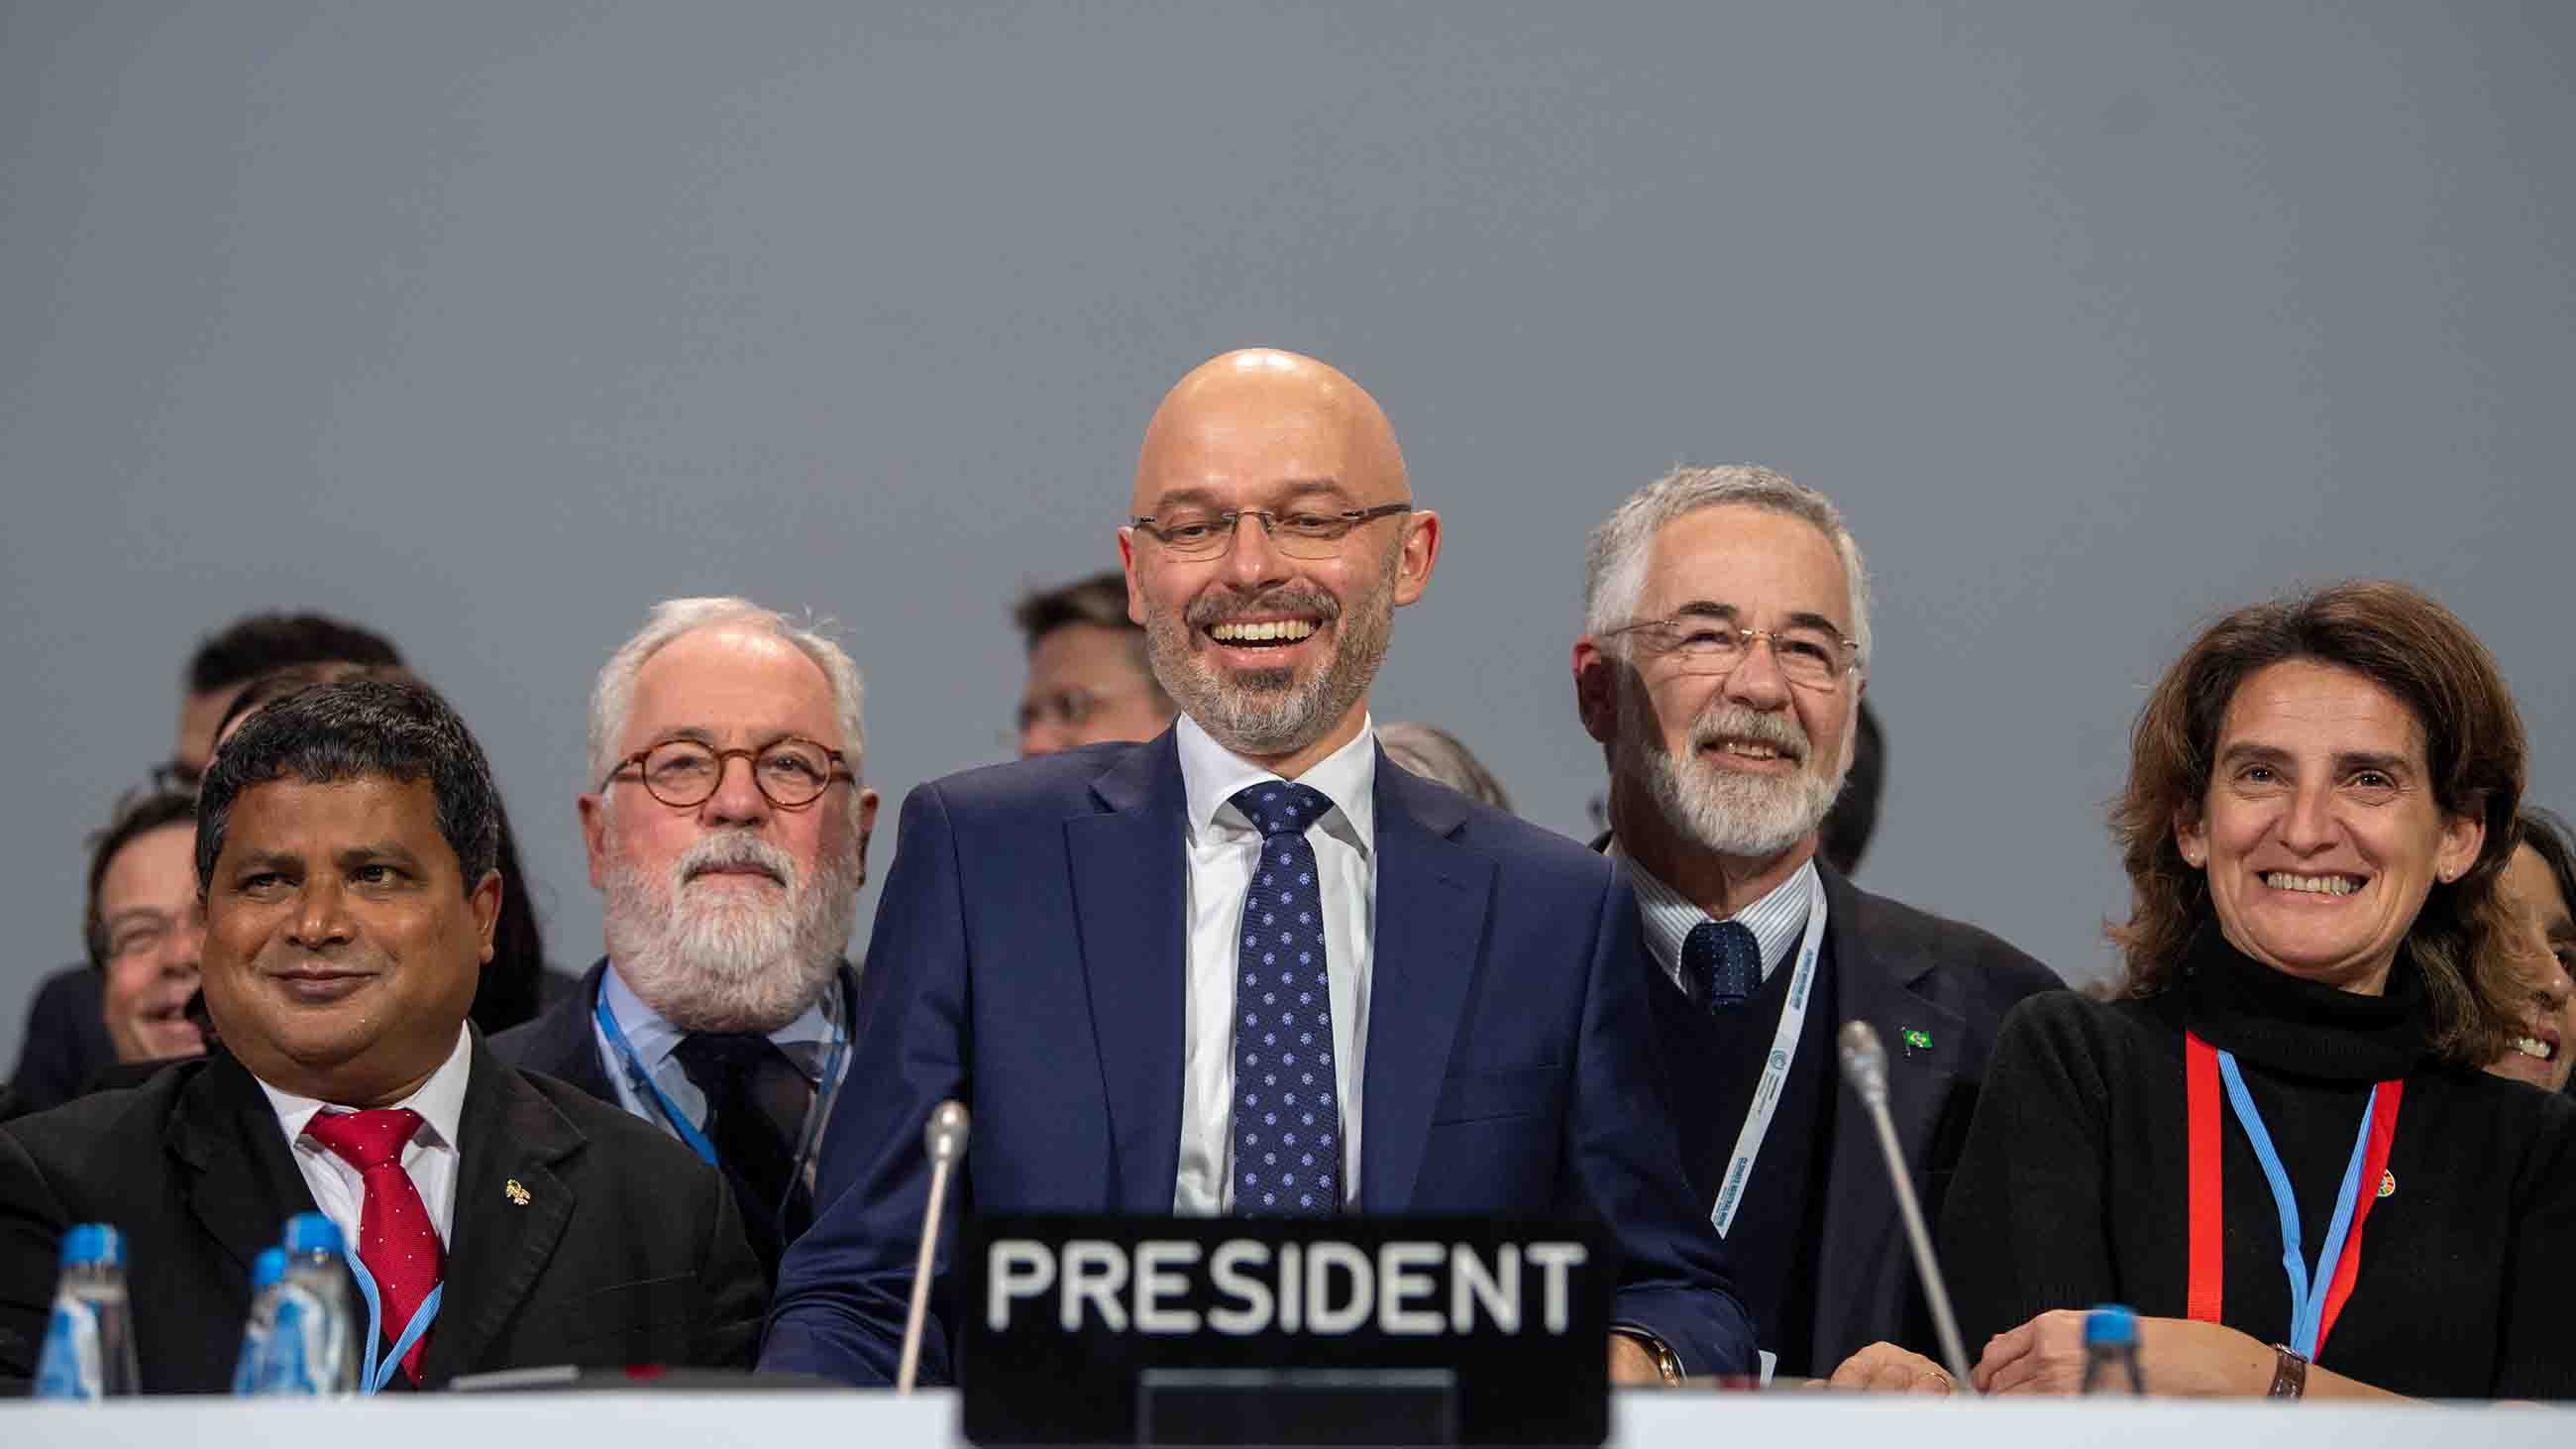 Despite staunch criticism about the world's lack of action on climate change, conference president Michal Kurtyka appeared happy with the meeting's results.